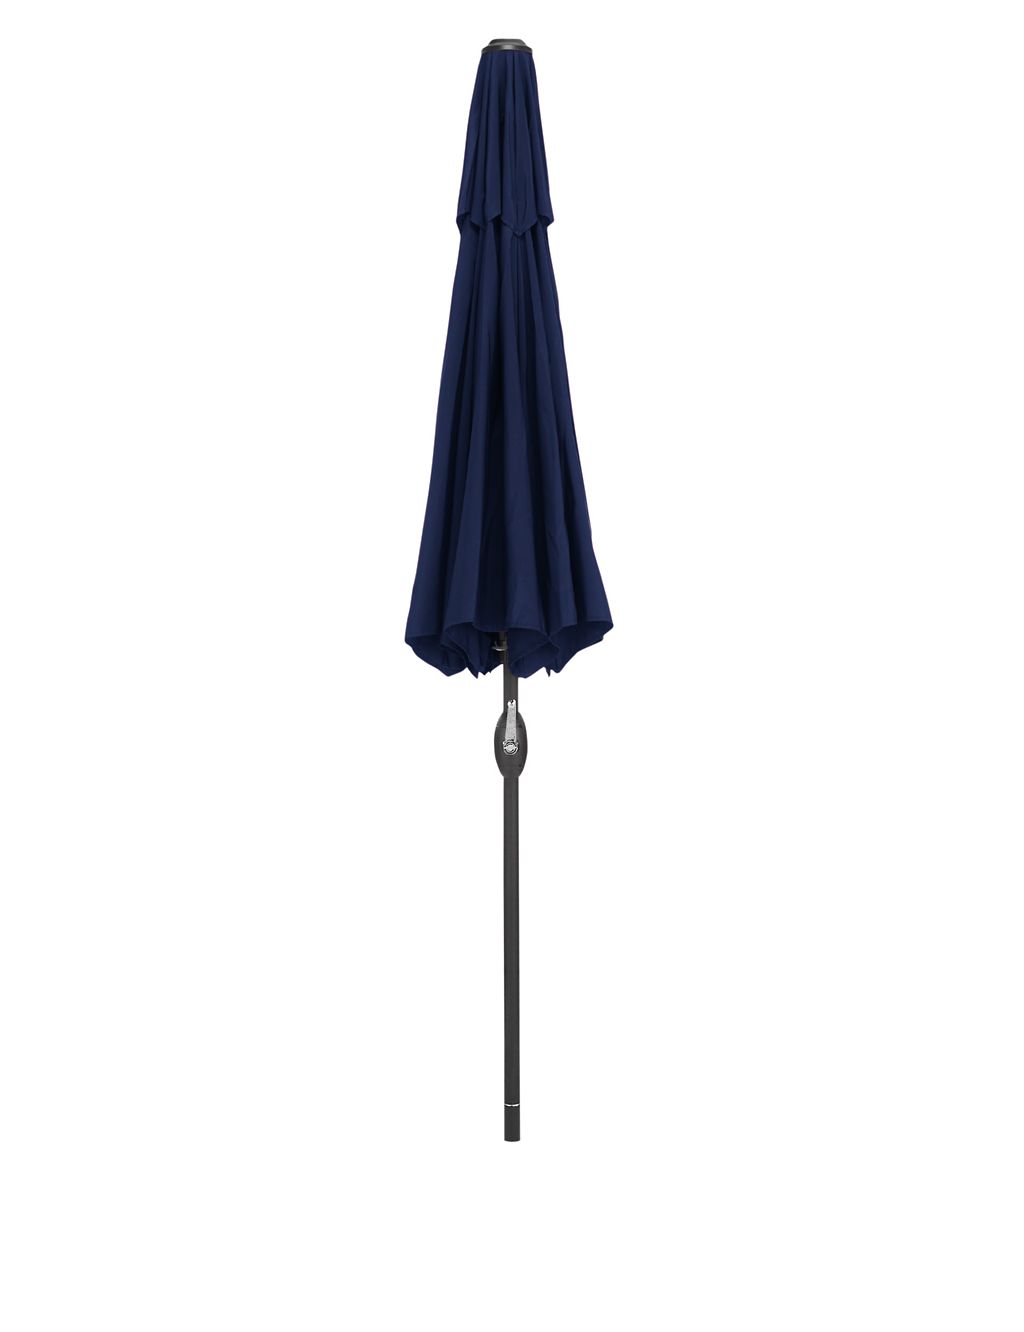 Navy Parasol with Black Pole 2 of 7